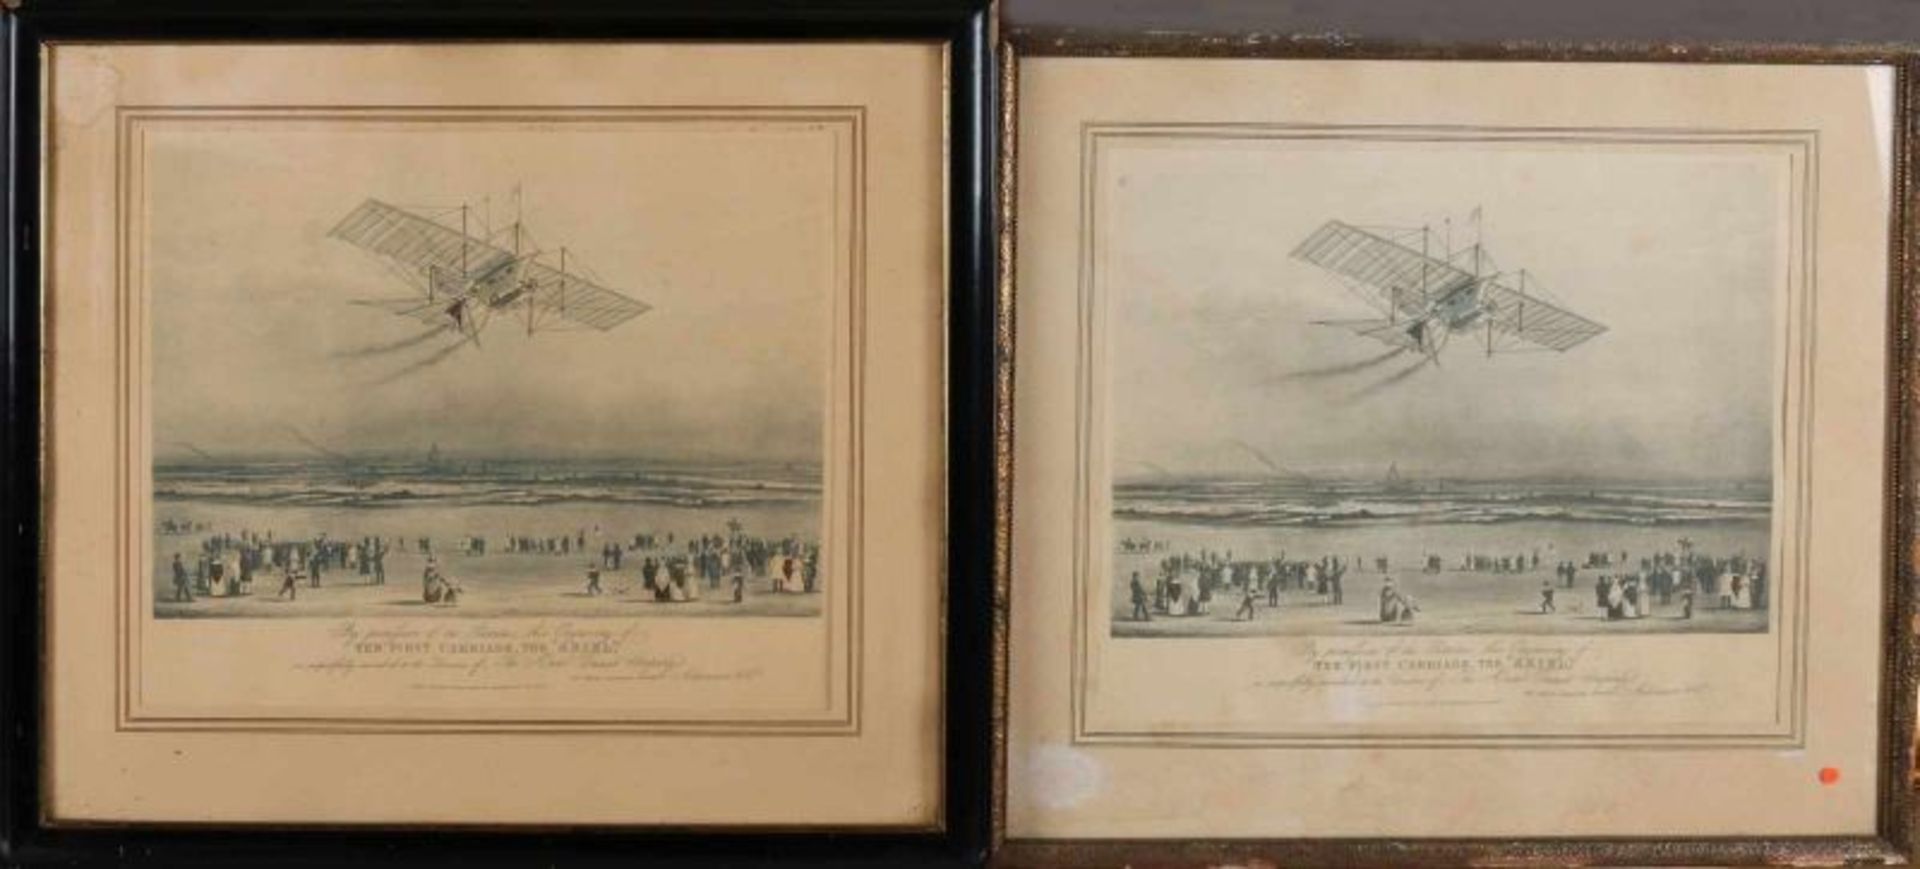 Twice 19th century prints. Aviation. The first carriage, The Ariel. Stone print on paper.